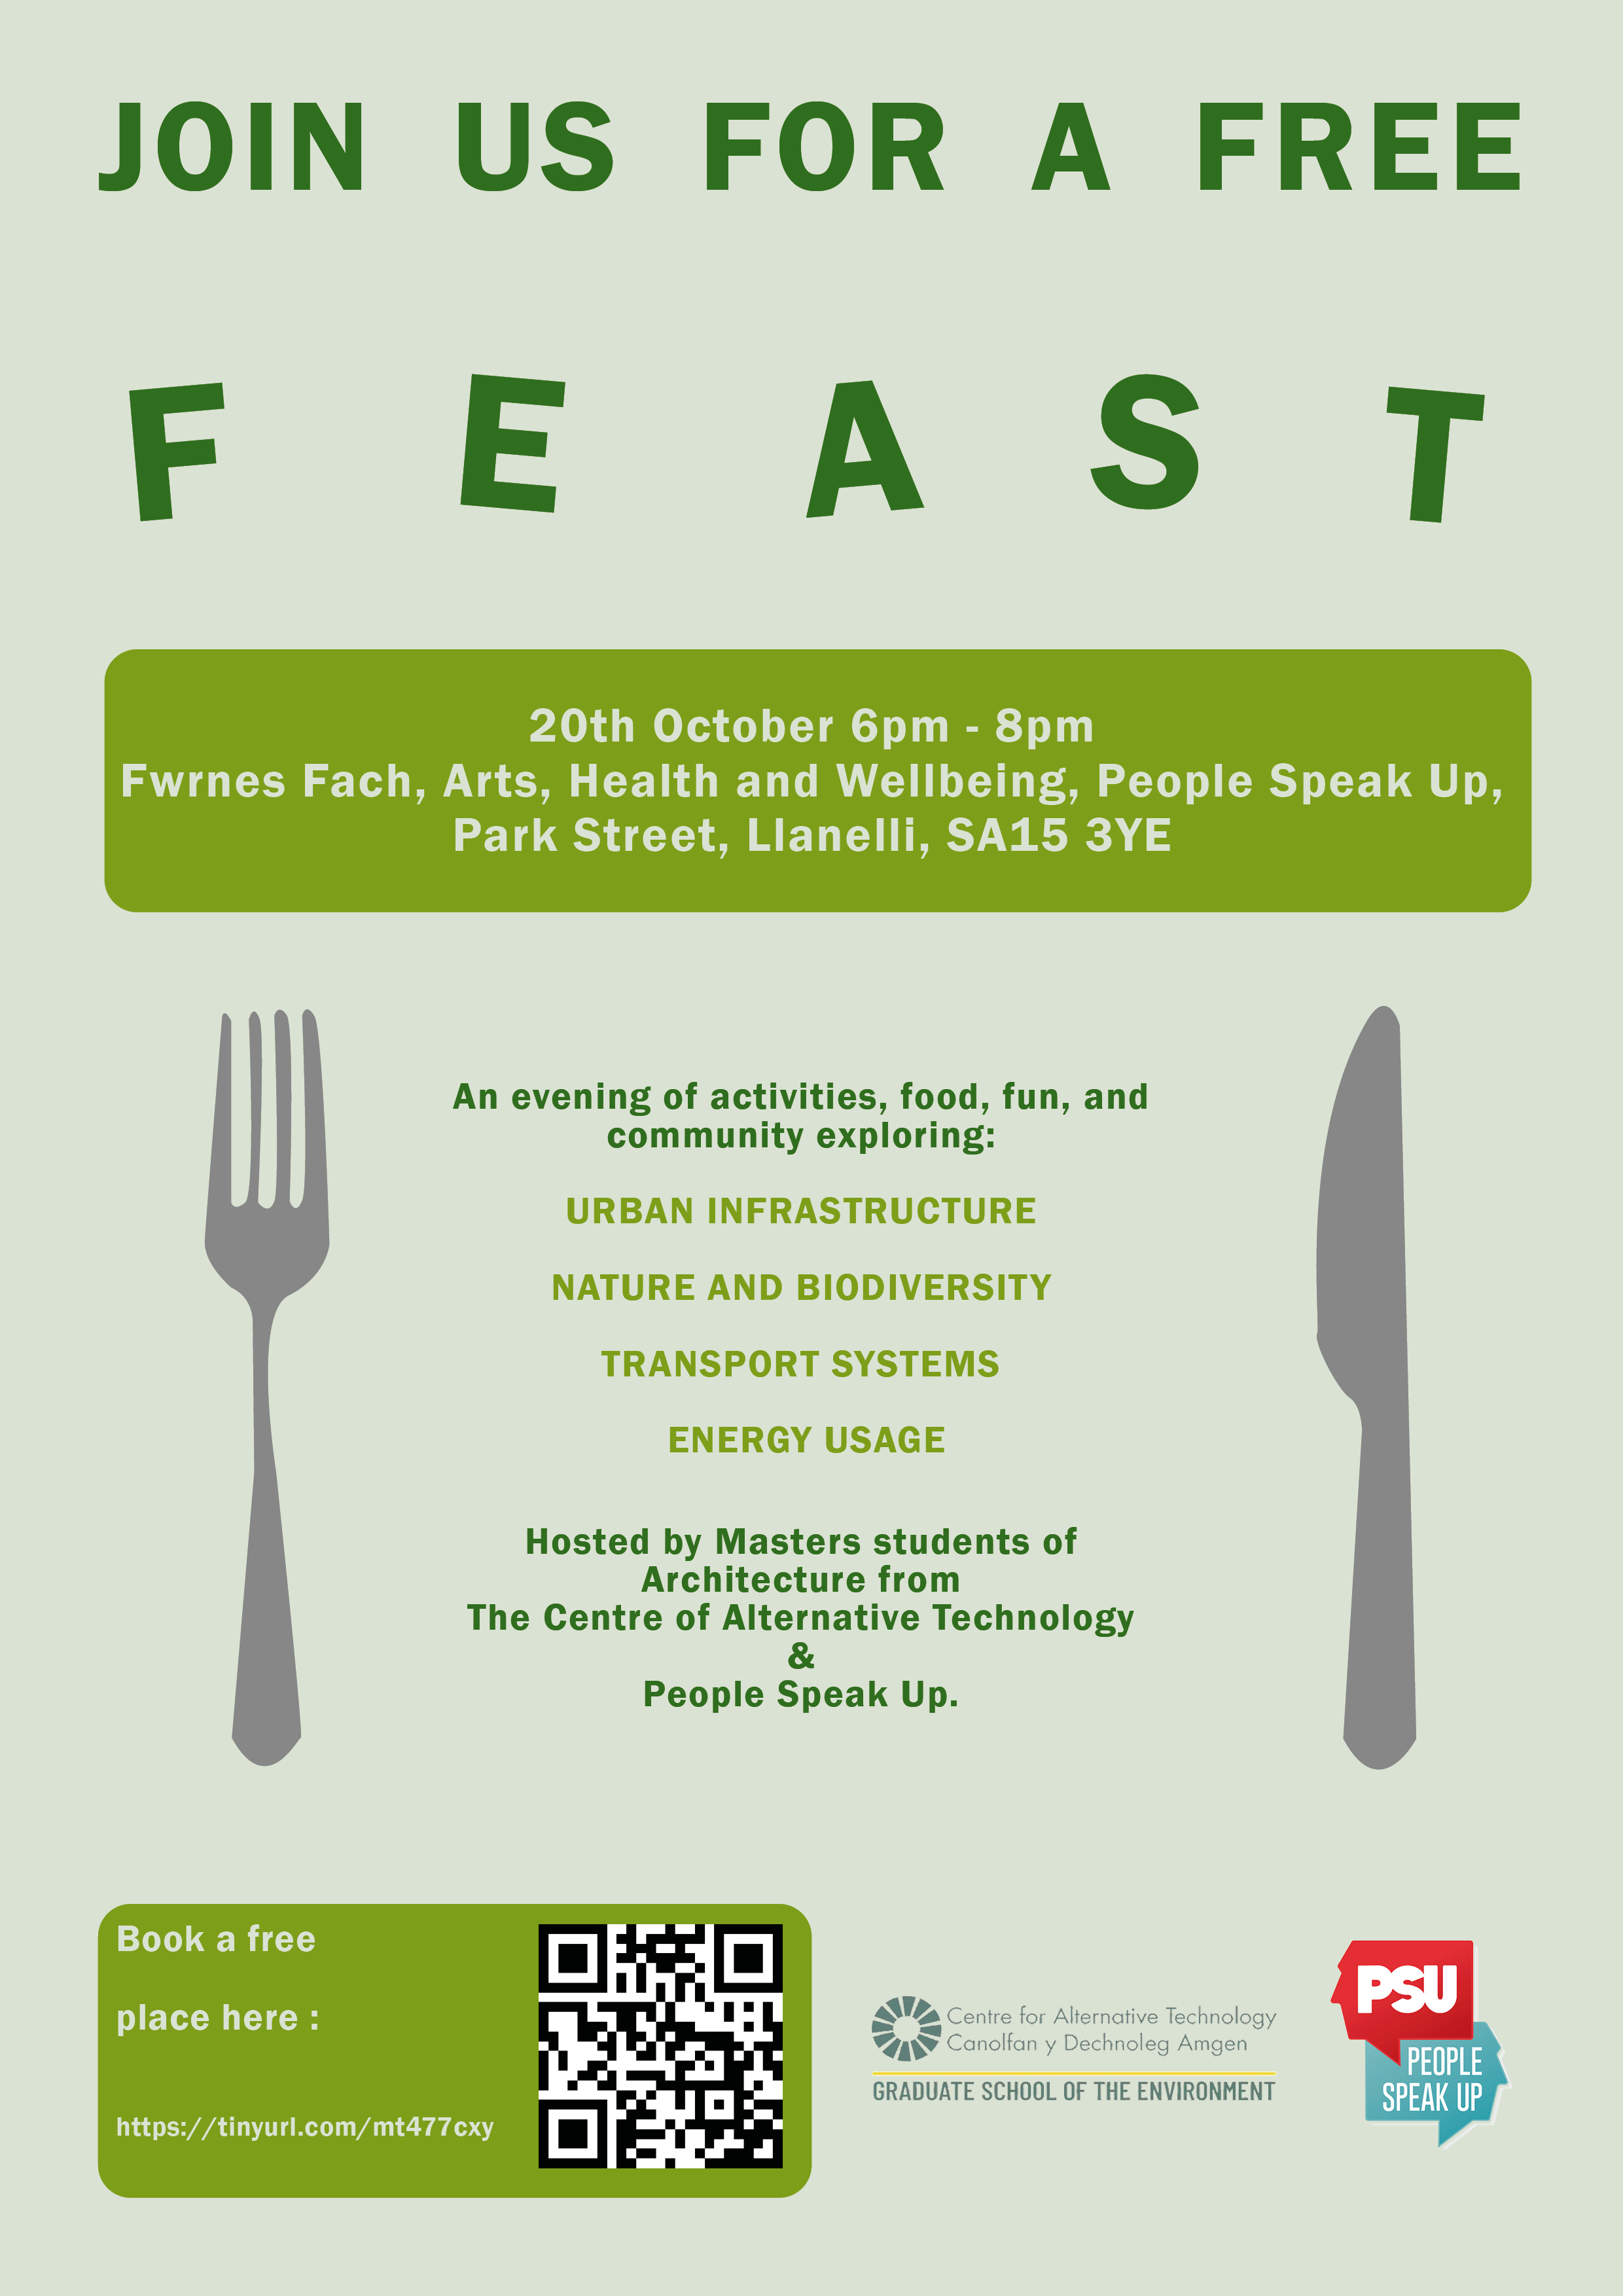 Come and join our Friday Night Feast!